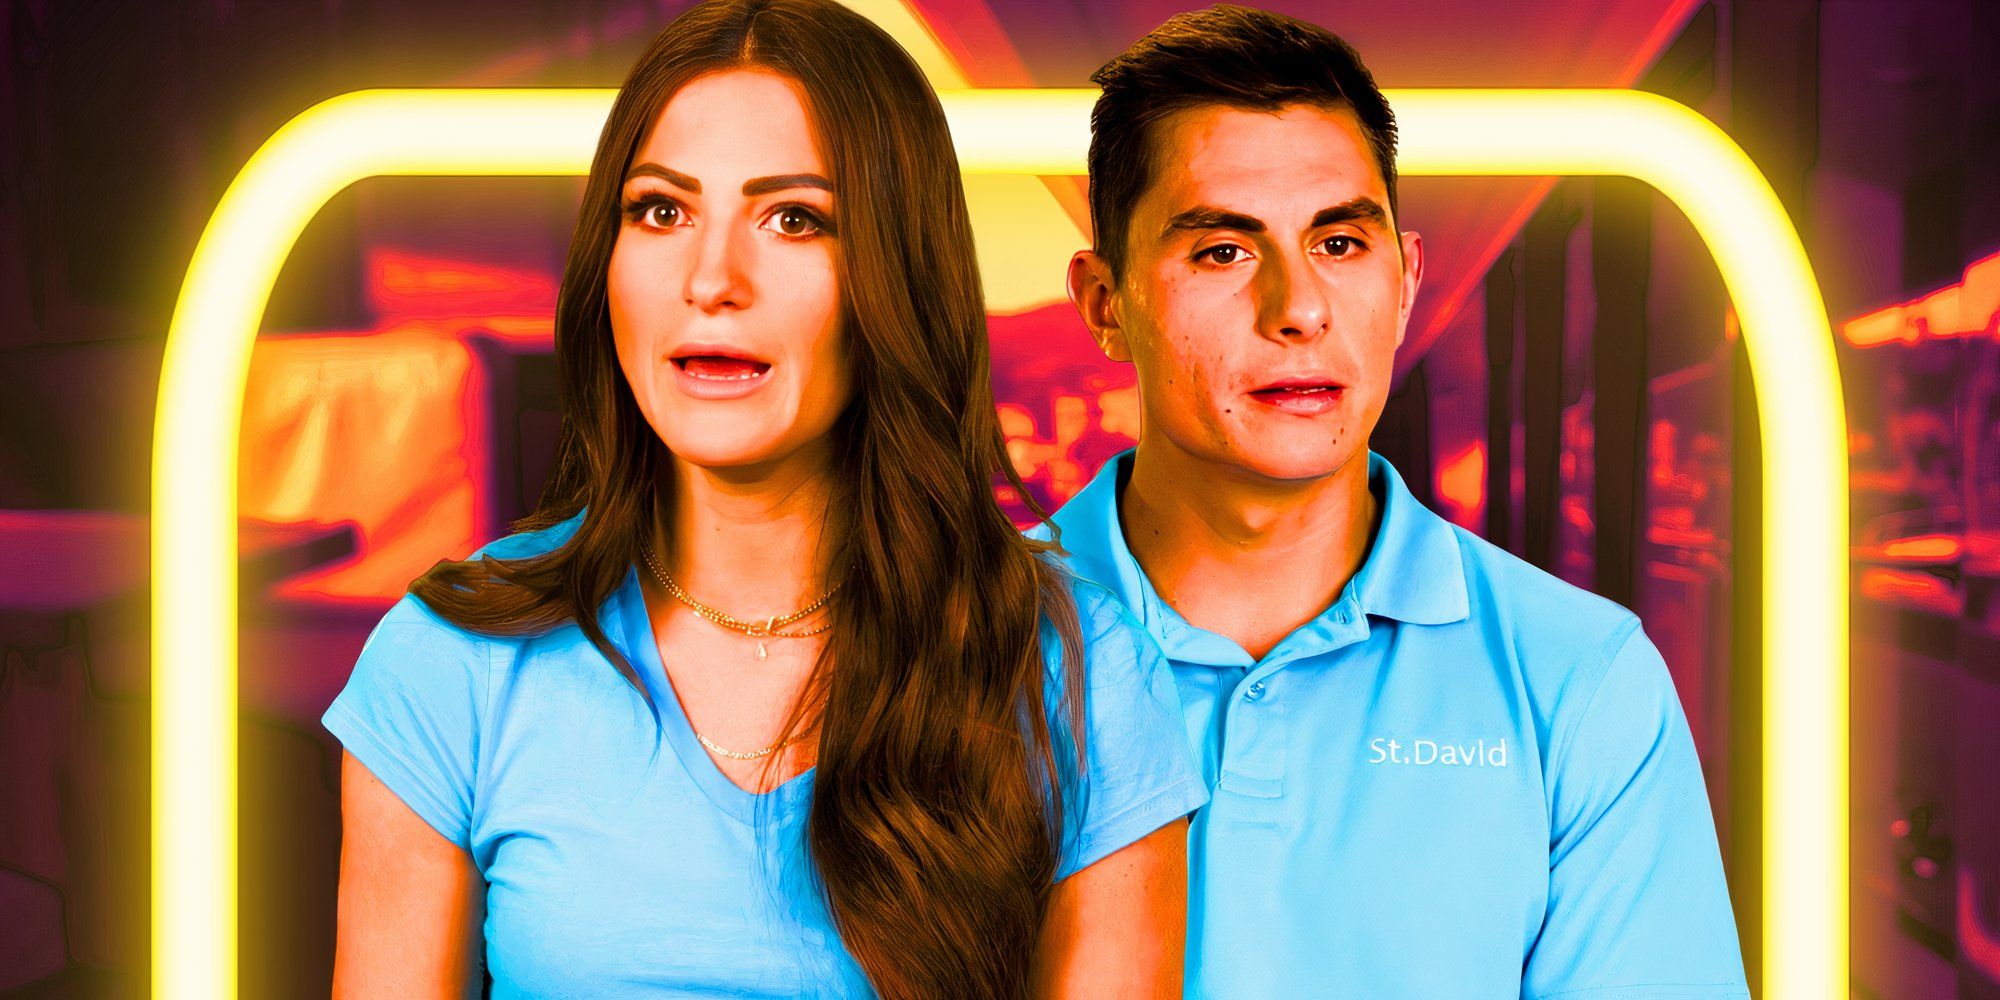 below deck's barbie and kyle side by side in the blue uniforms with red and yellow background